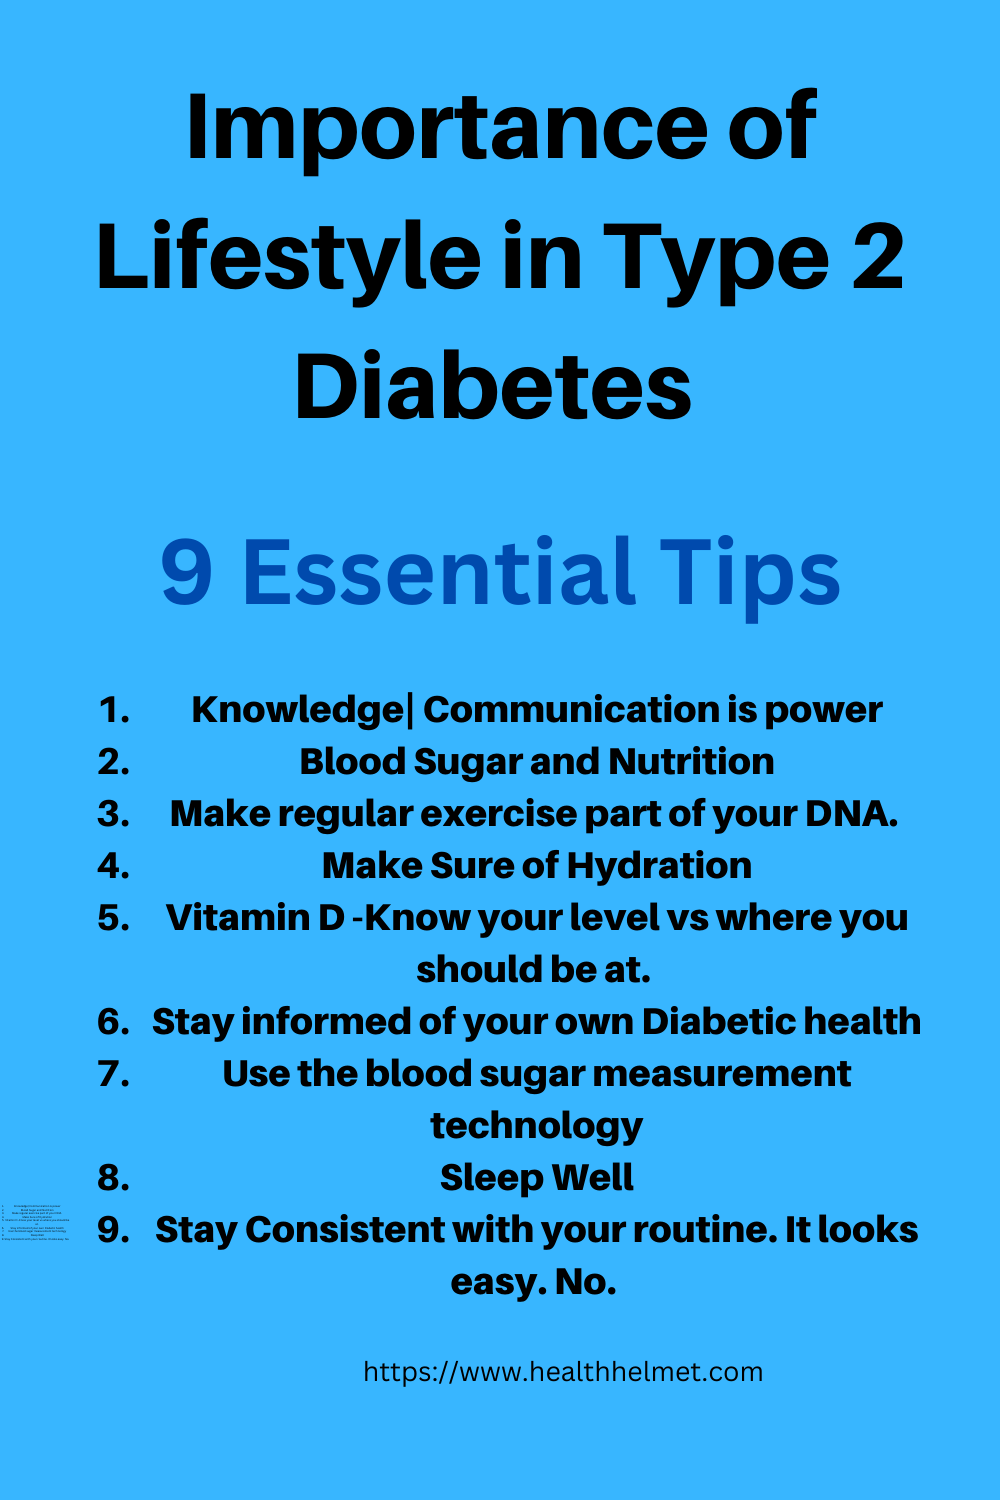 Importance of Lifestyle in Type 2 Diabetes